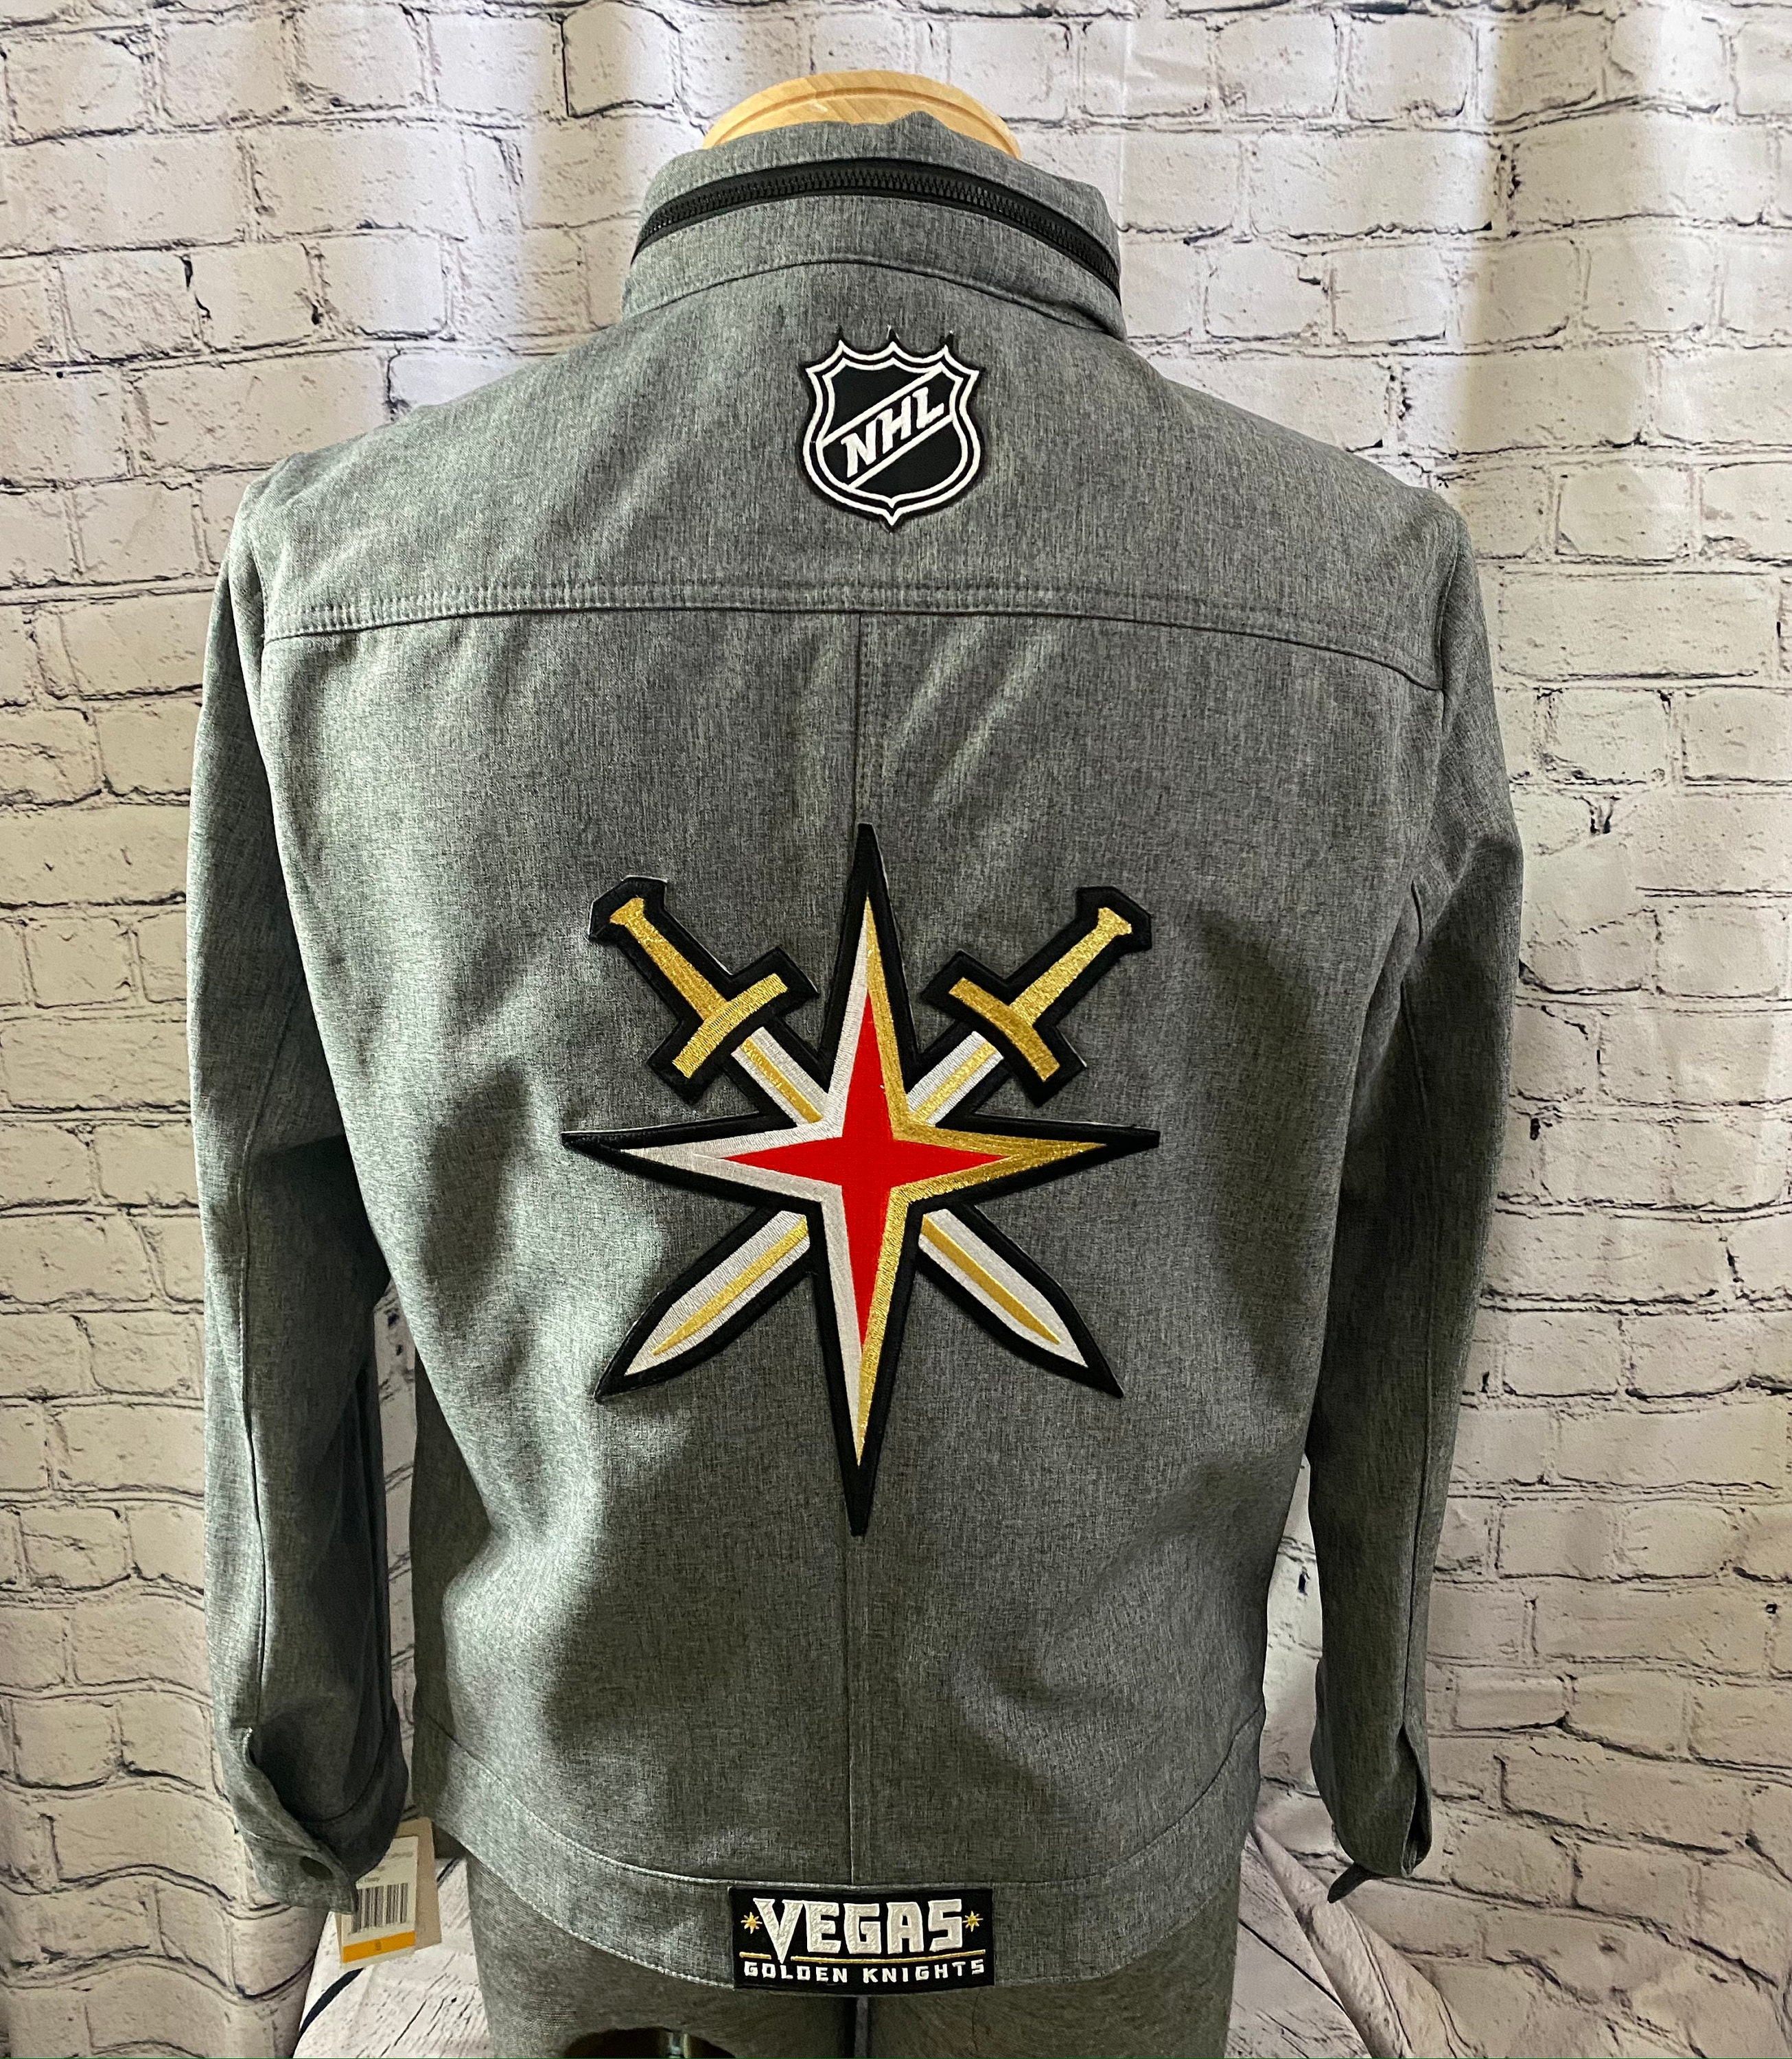 How to Make Your Own Vegas Golden Knights Jacket